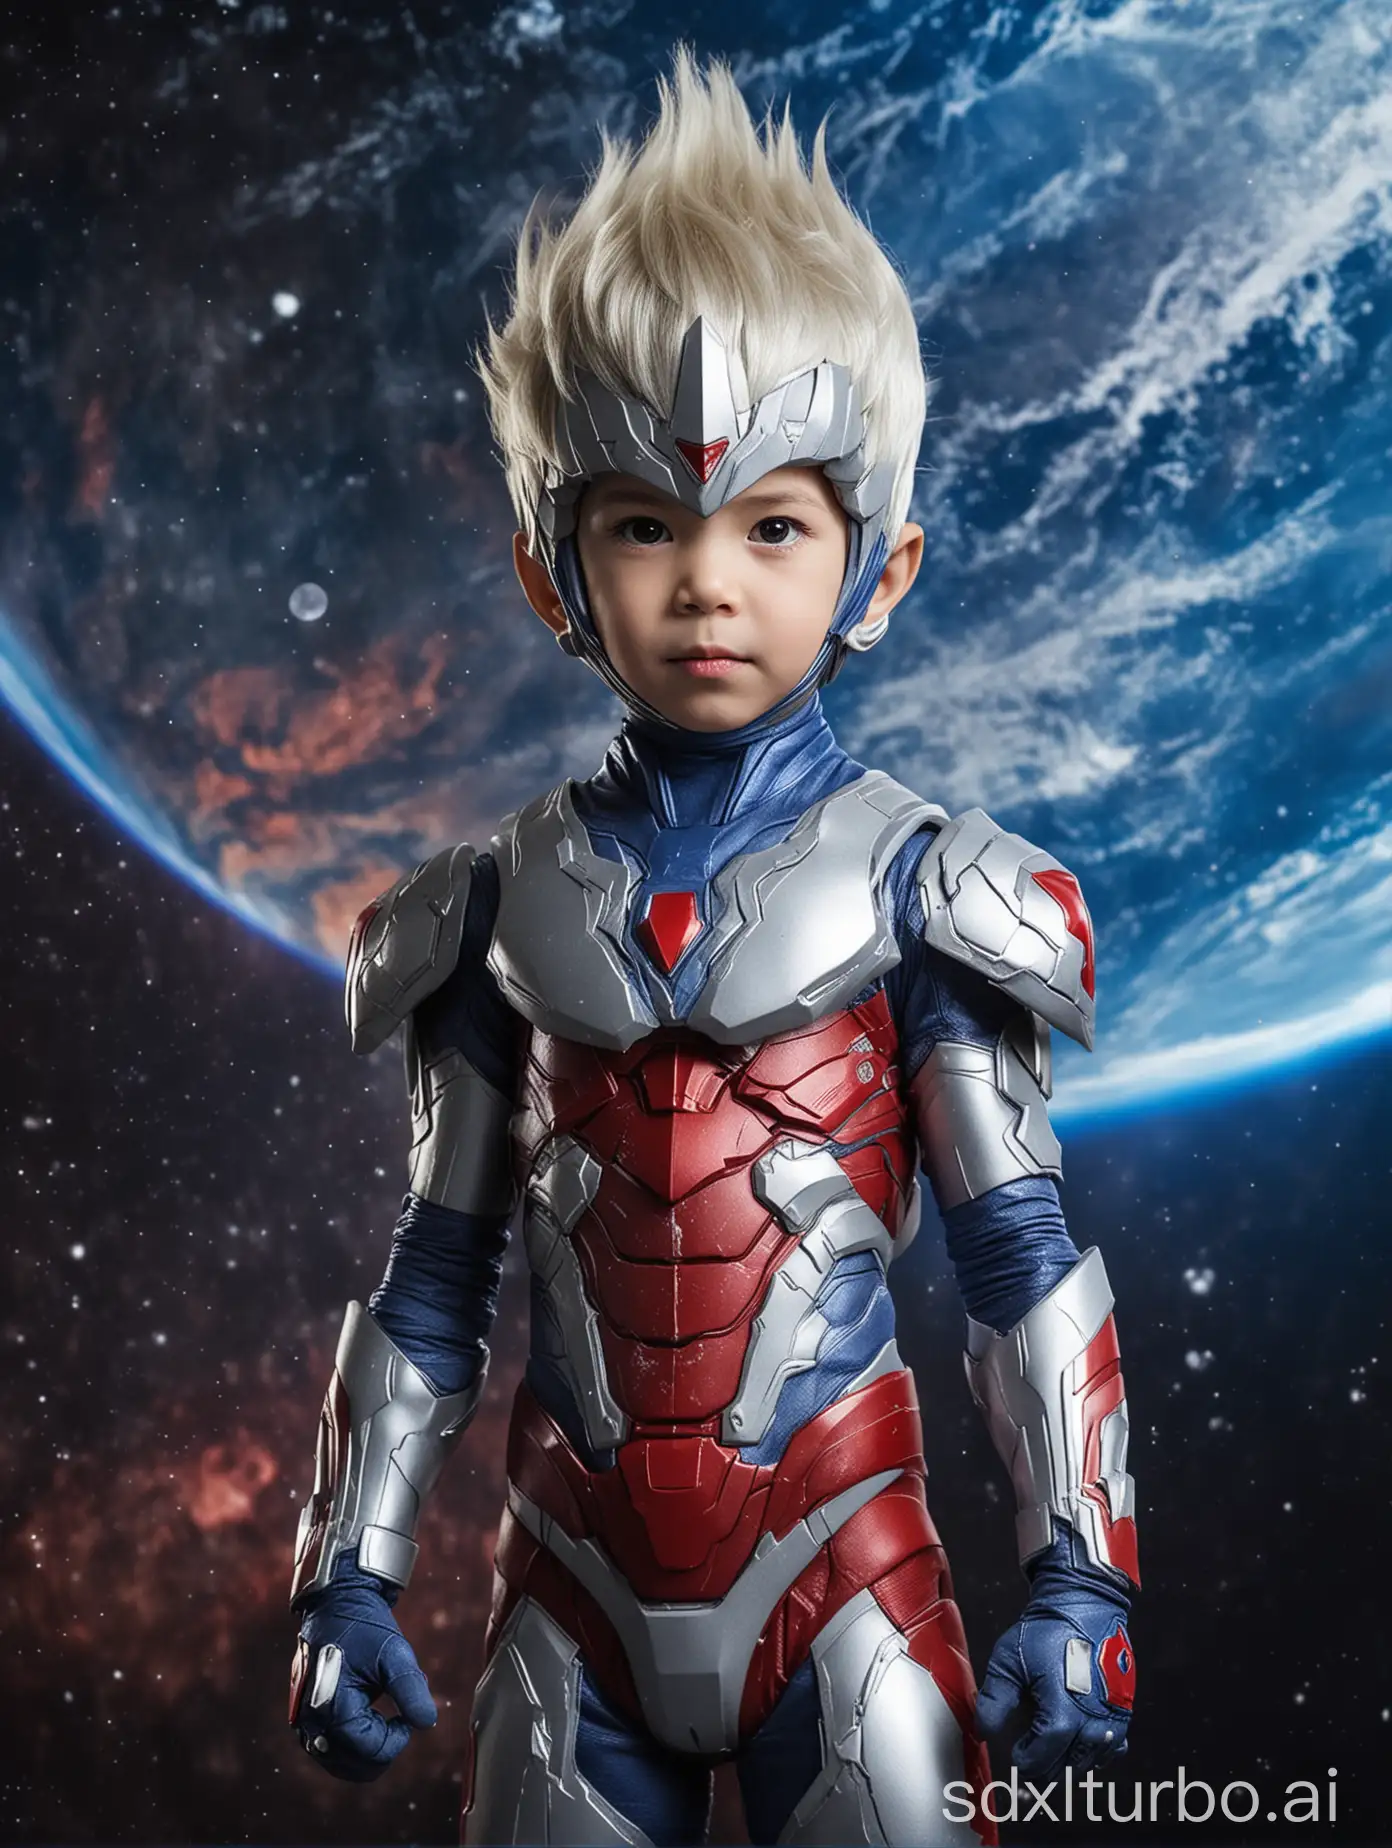 Young-Boy-Cosplaying-as-Ultraman-with-Cosmic-Background